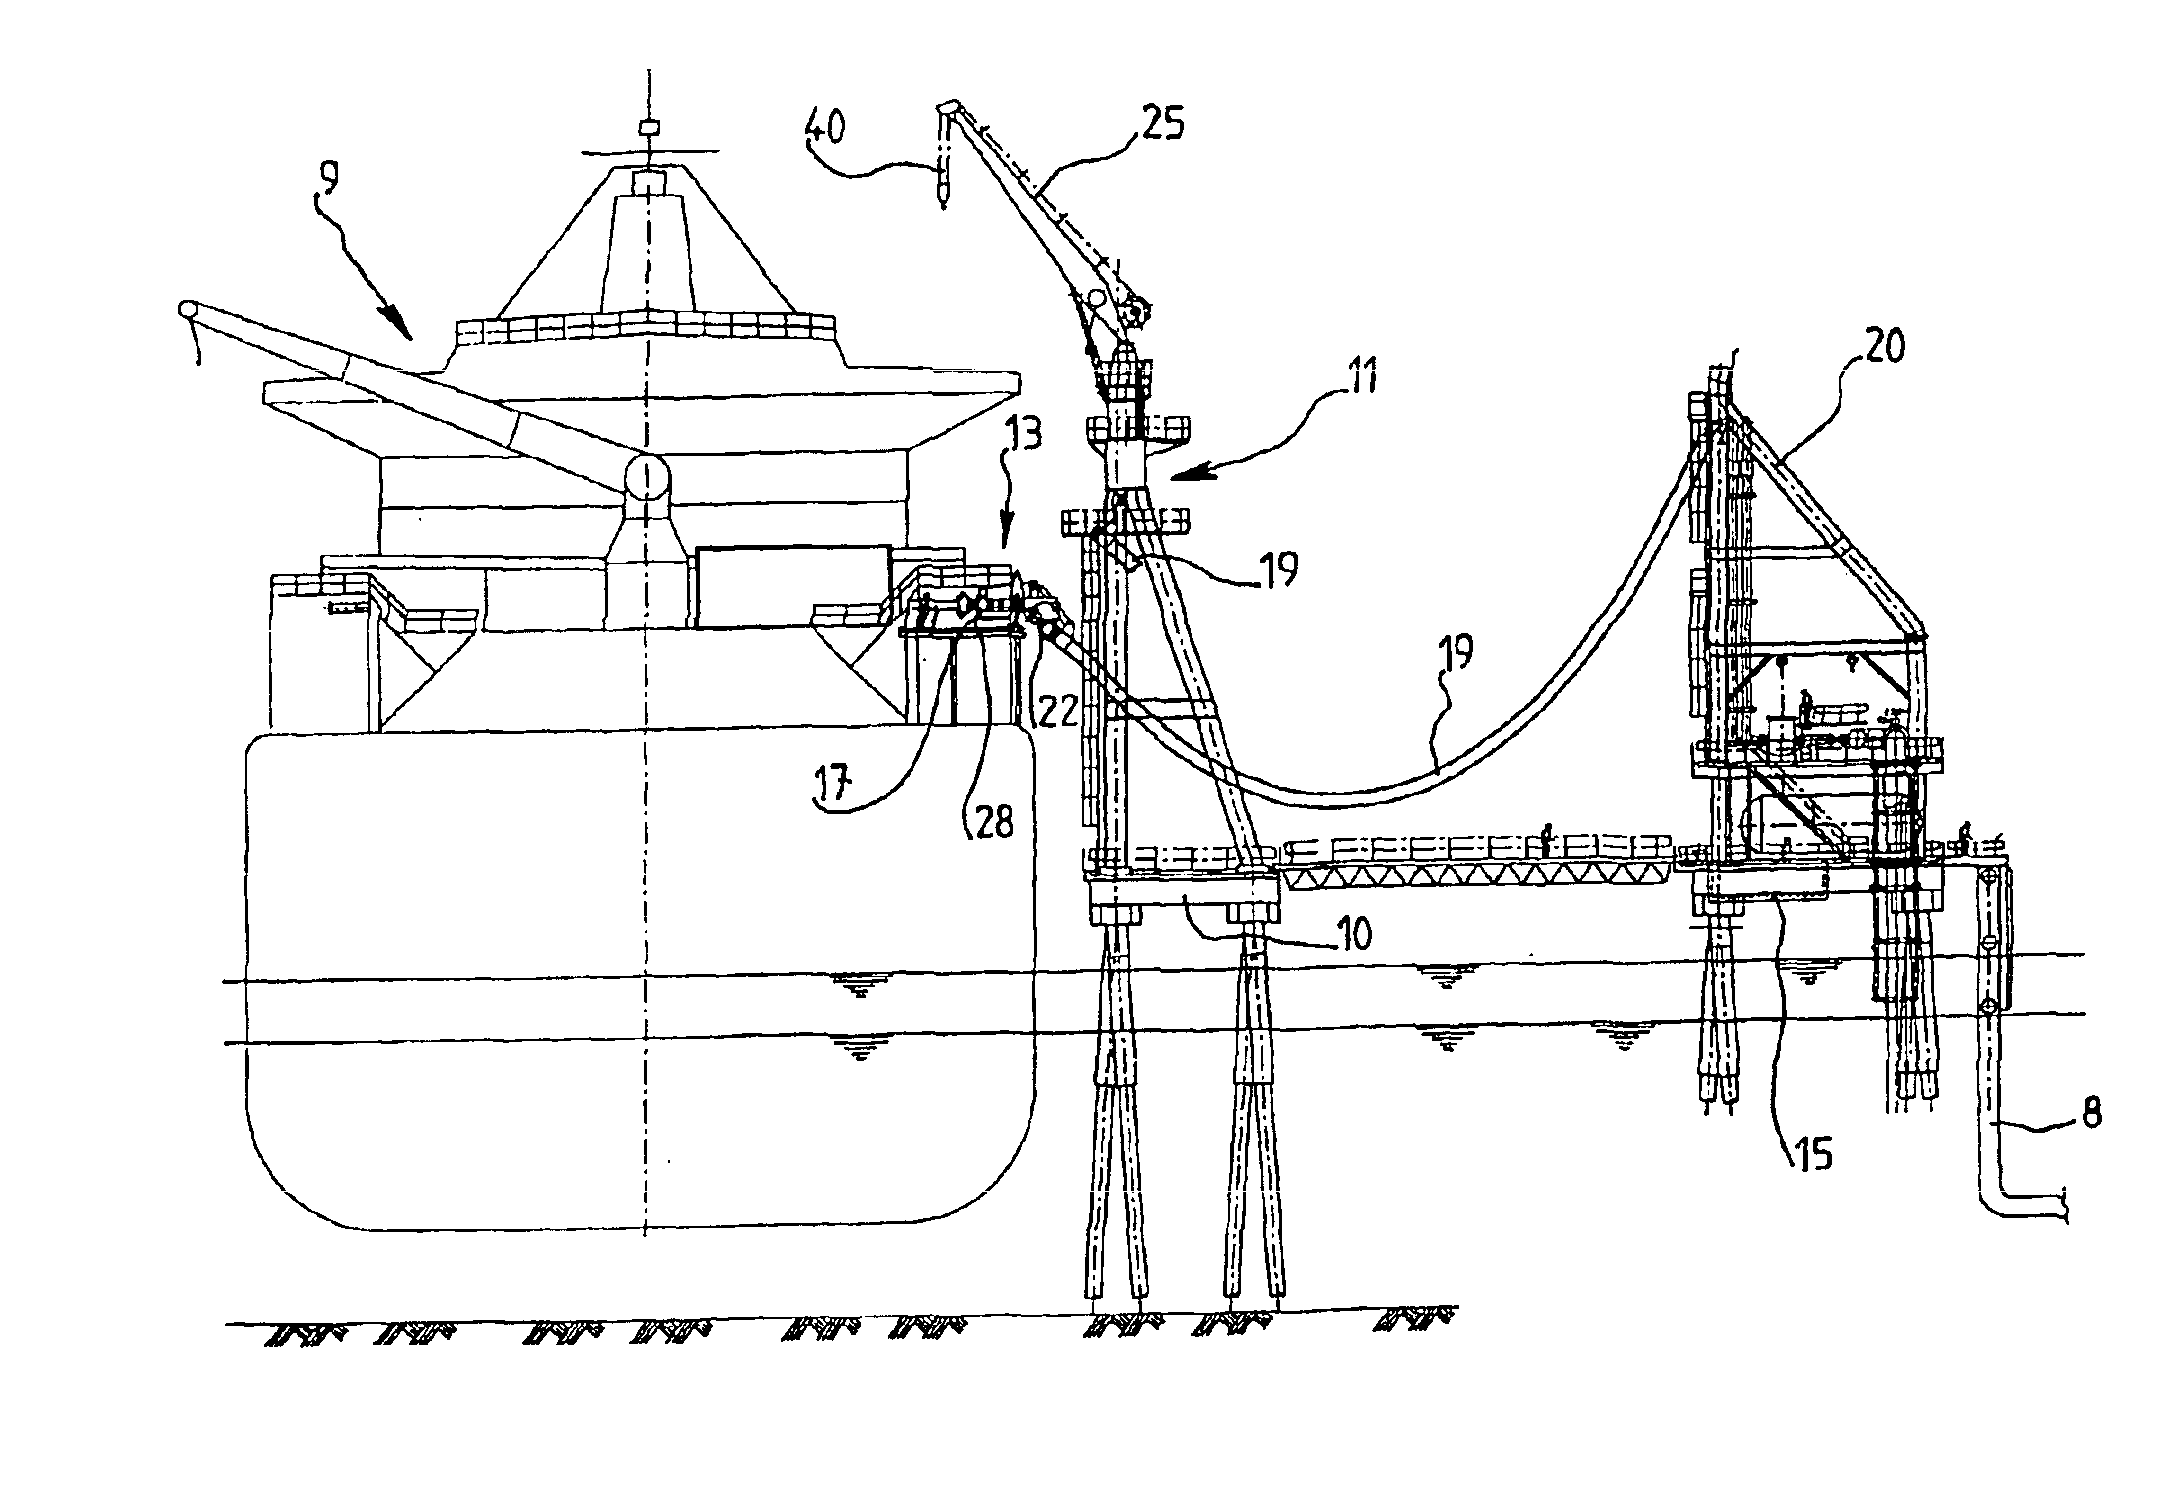 System for transferring a fluid product between a carrying vessel and a shore installation